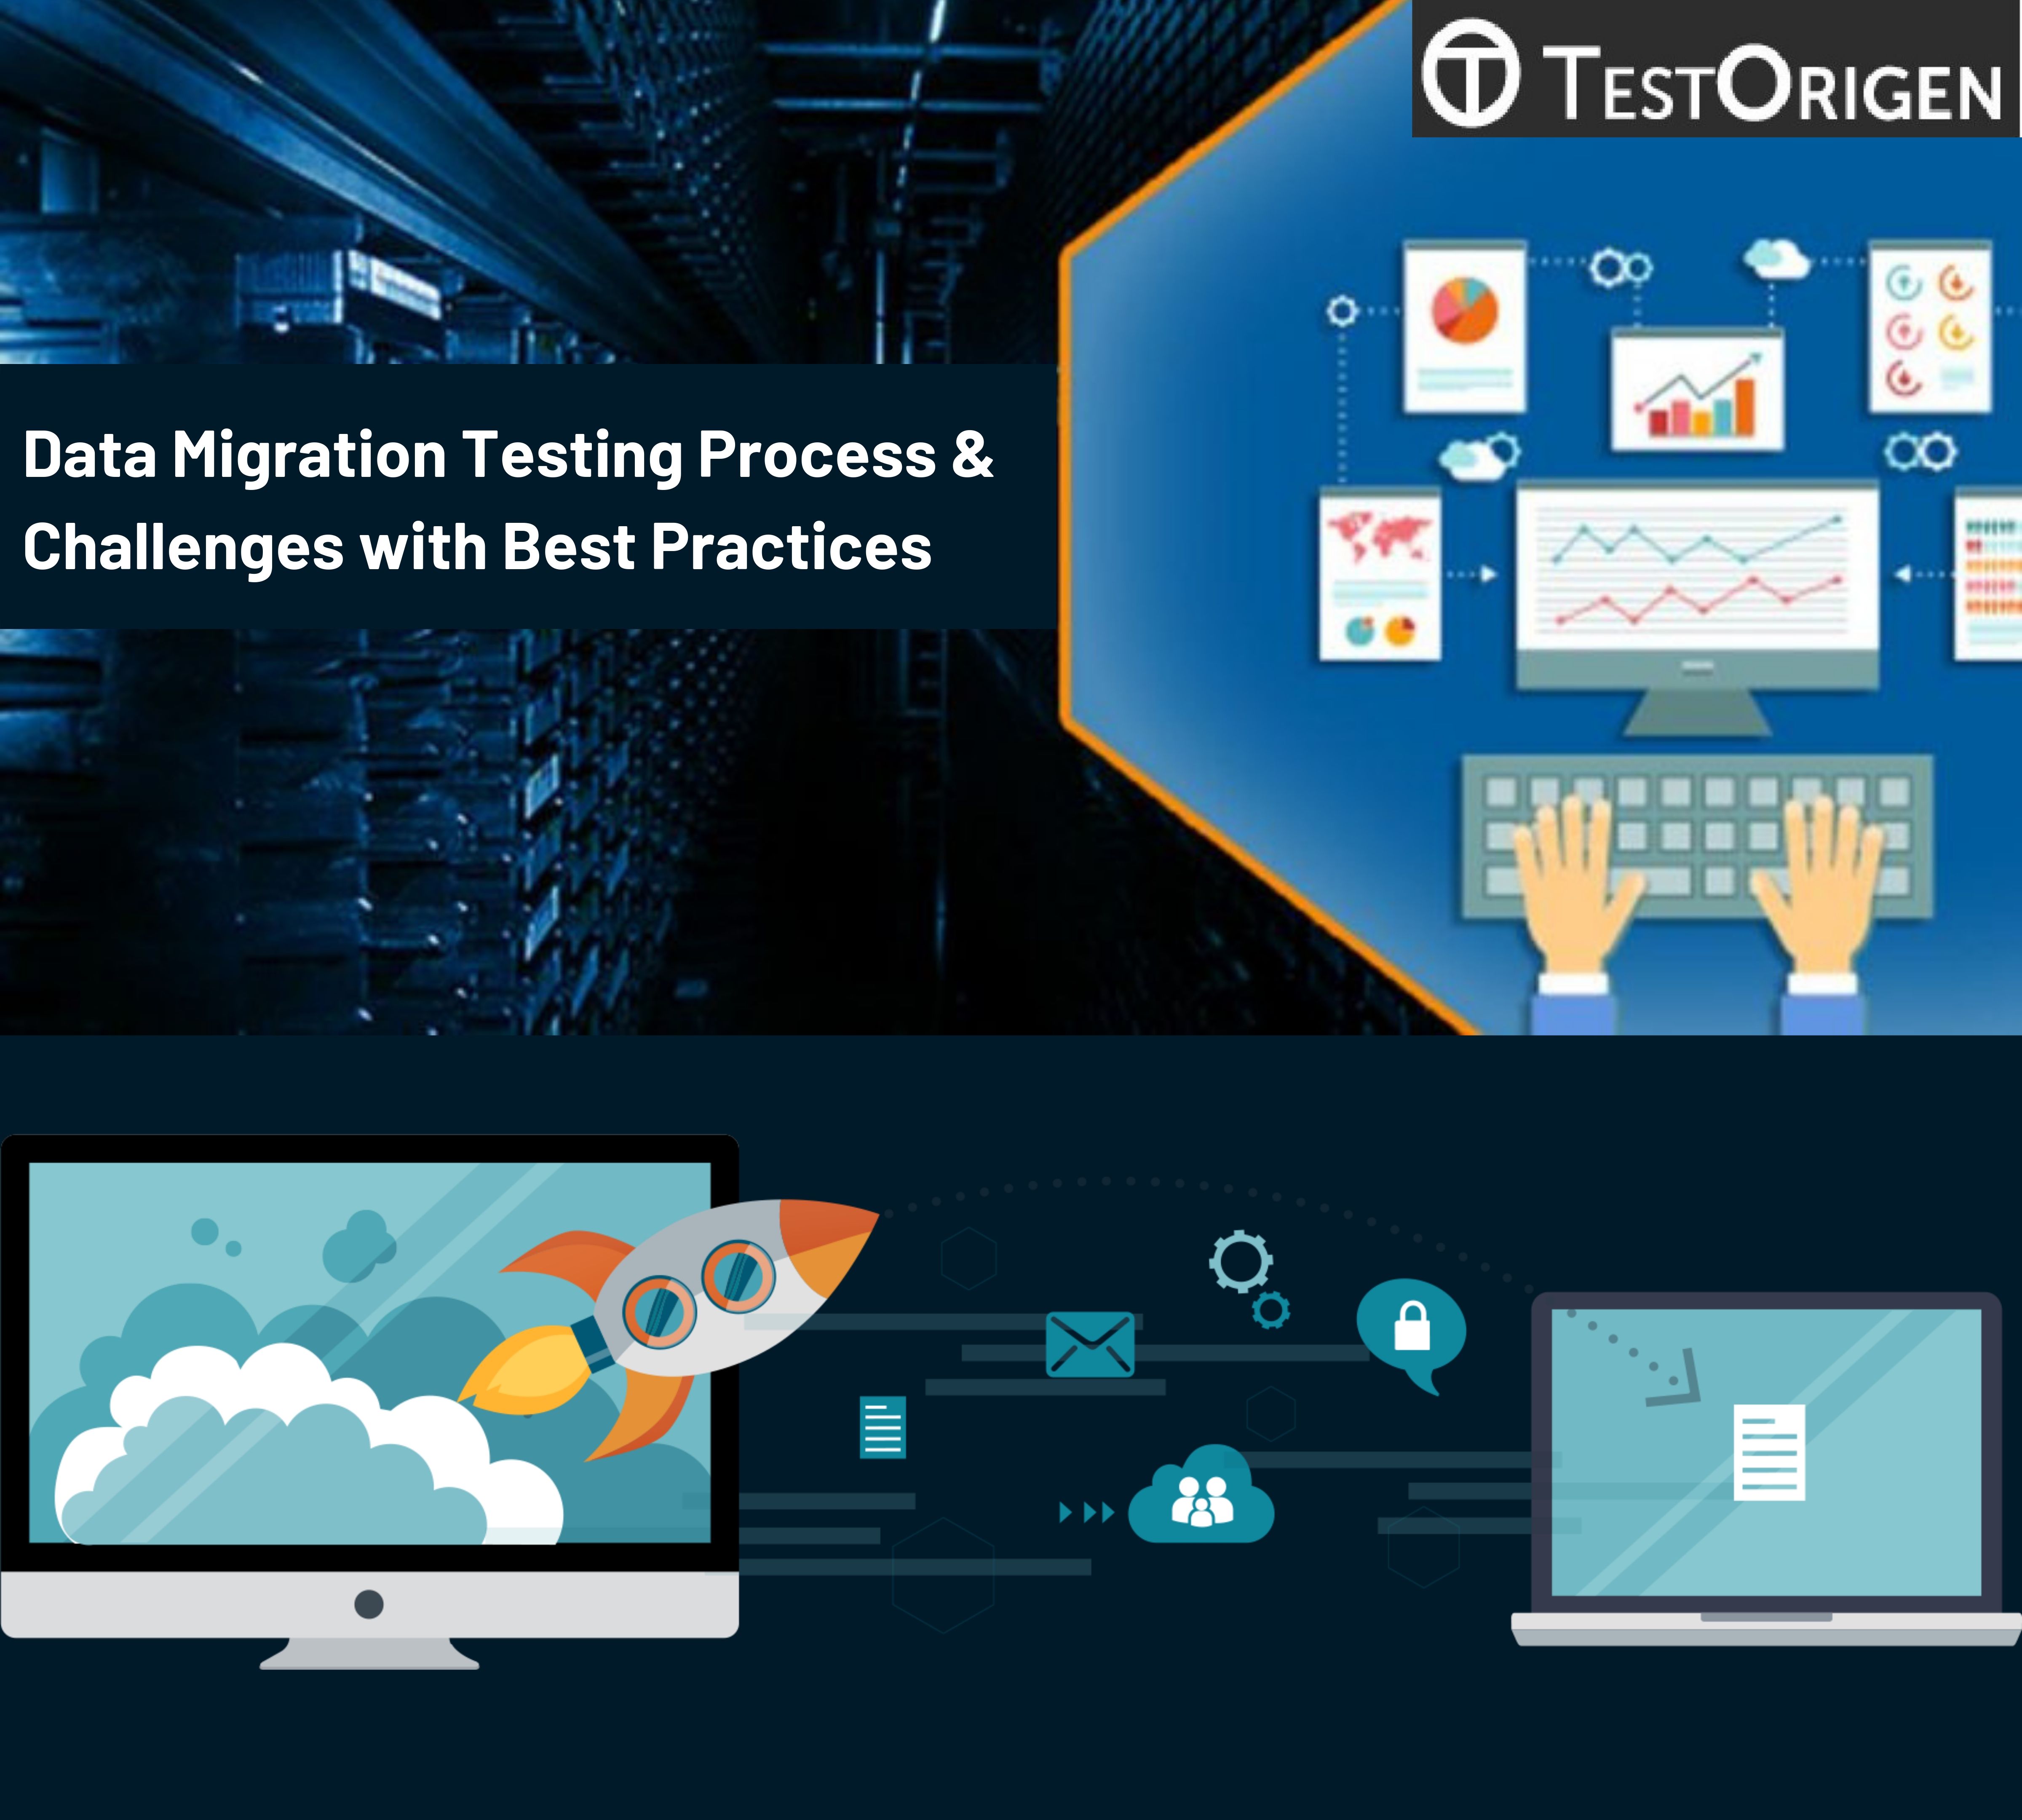 Data Migration Testing Process & Challenges with Best Practices